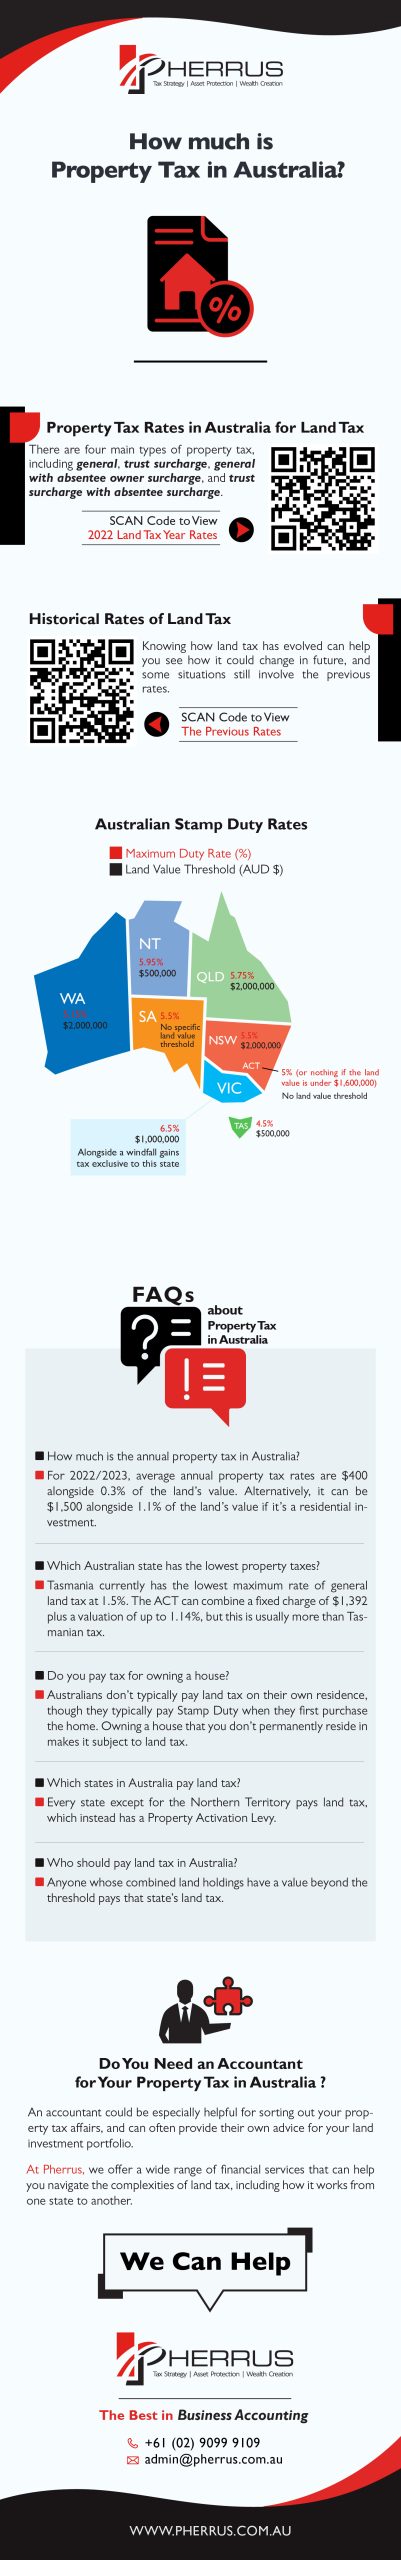 How much is Property Tax in Australia infographic 